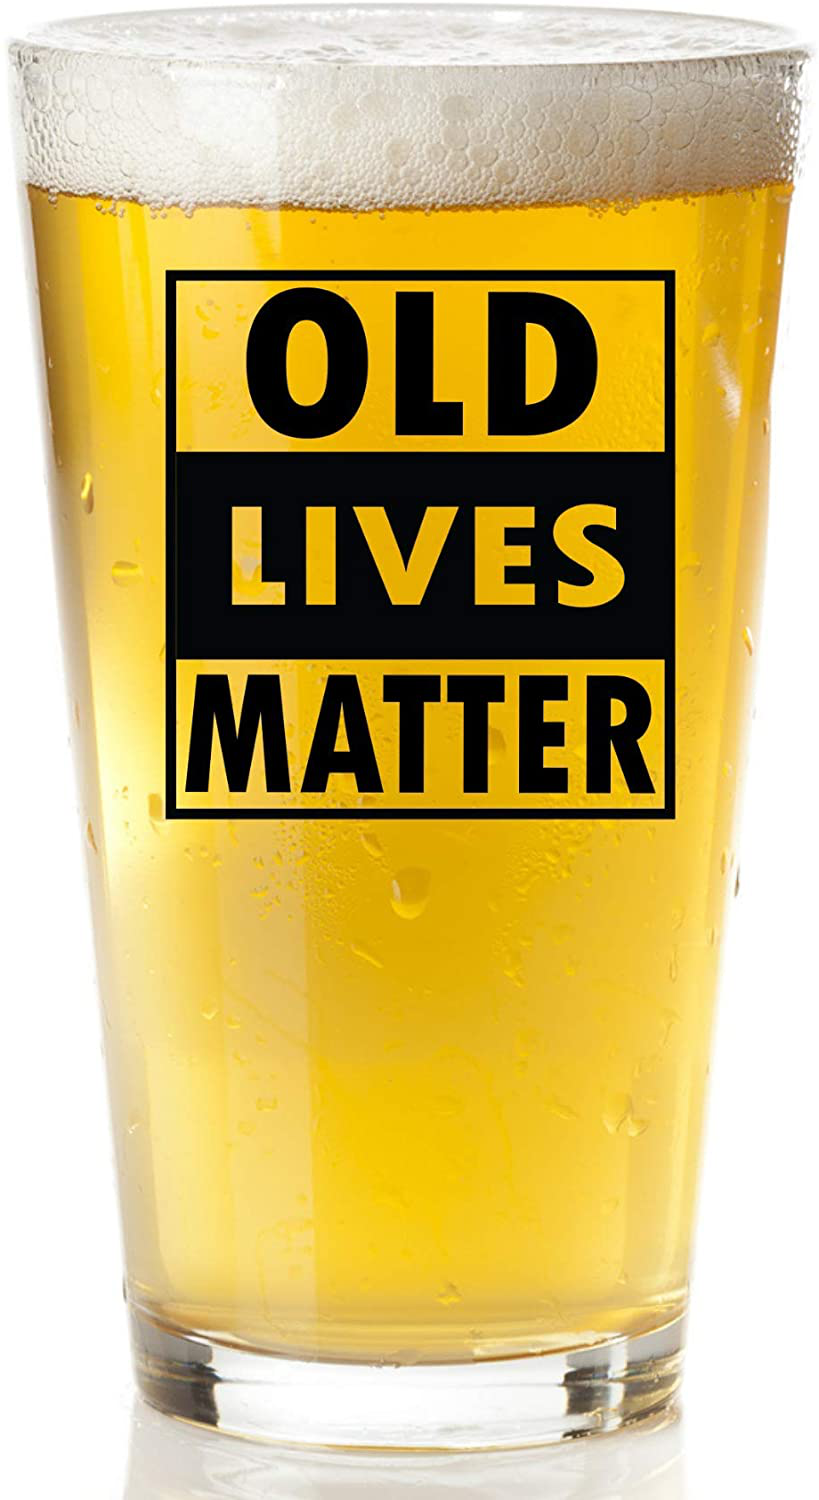 Old Lives Matter Beer Glass - Funny Retirement or Birthday Gifts for Men - Unique Gag Gifts for Dad, Grandpa, Old Man, or Senior Citizen